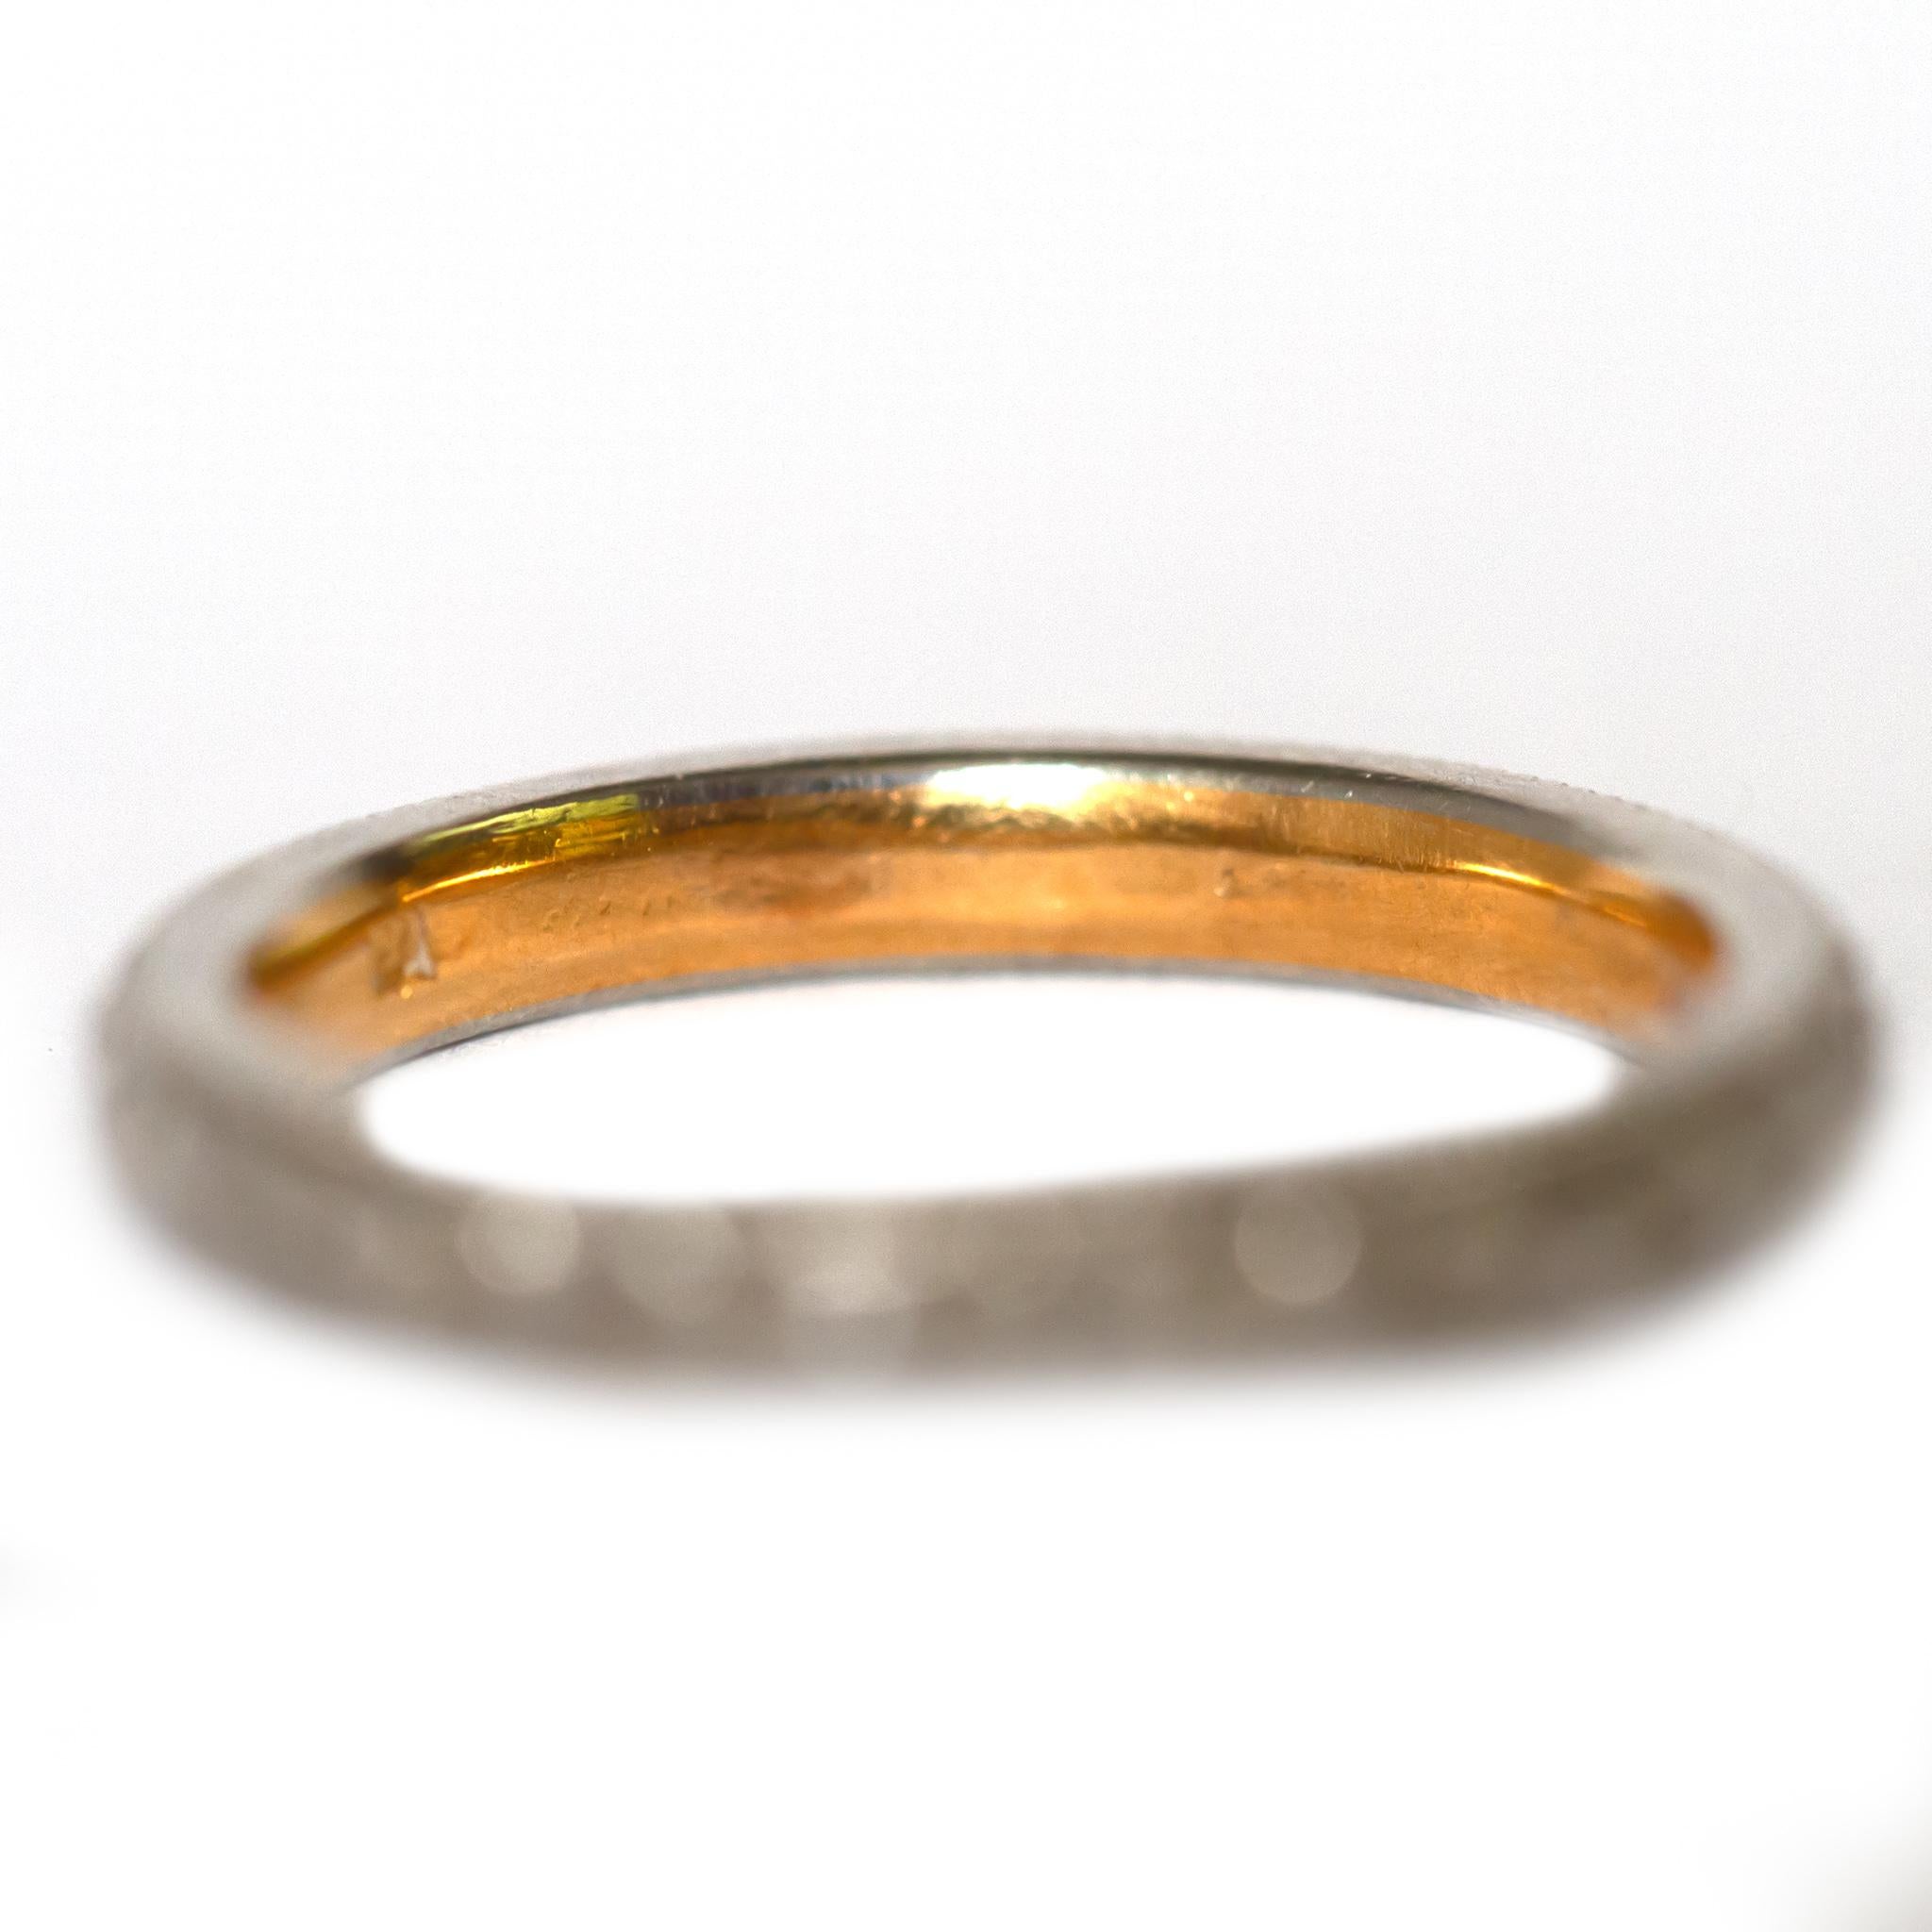 Ring Size: 7
Metal Type: 18 karat Yellow Gold & Platinum [Hallmarked, and Tested]
Weight: 4 grams
Finger to Top of Stone Measurement: 2.5mm
Condition: Excellent